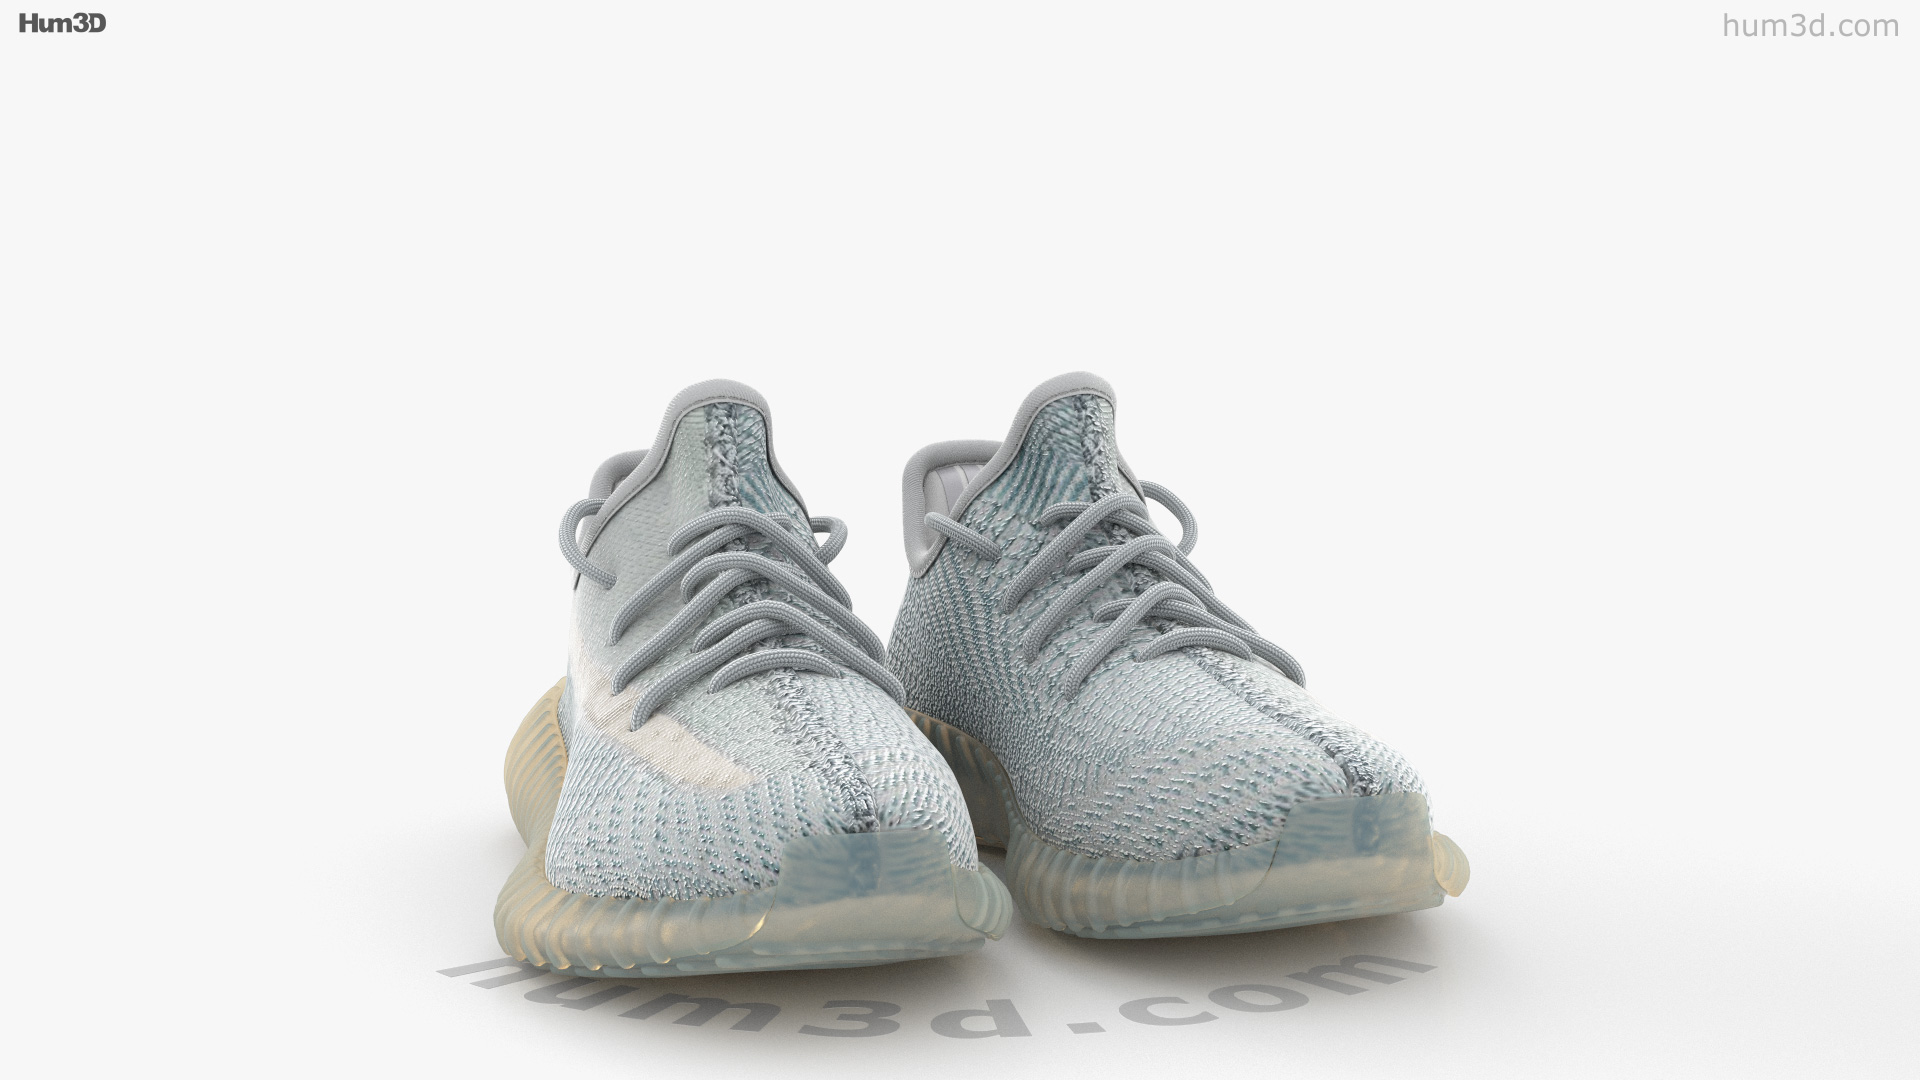 360 view of Yeezy Boost 350 3D model - Hum3D store